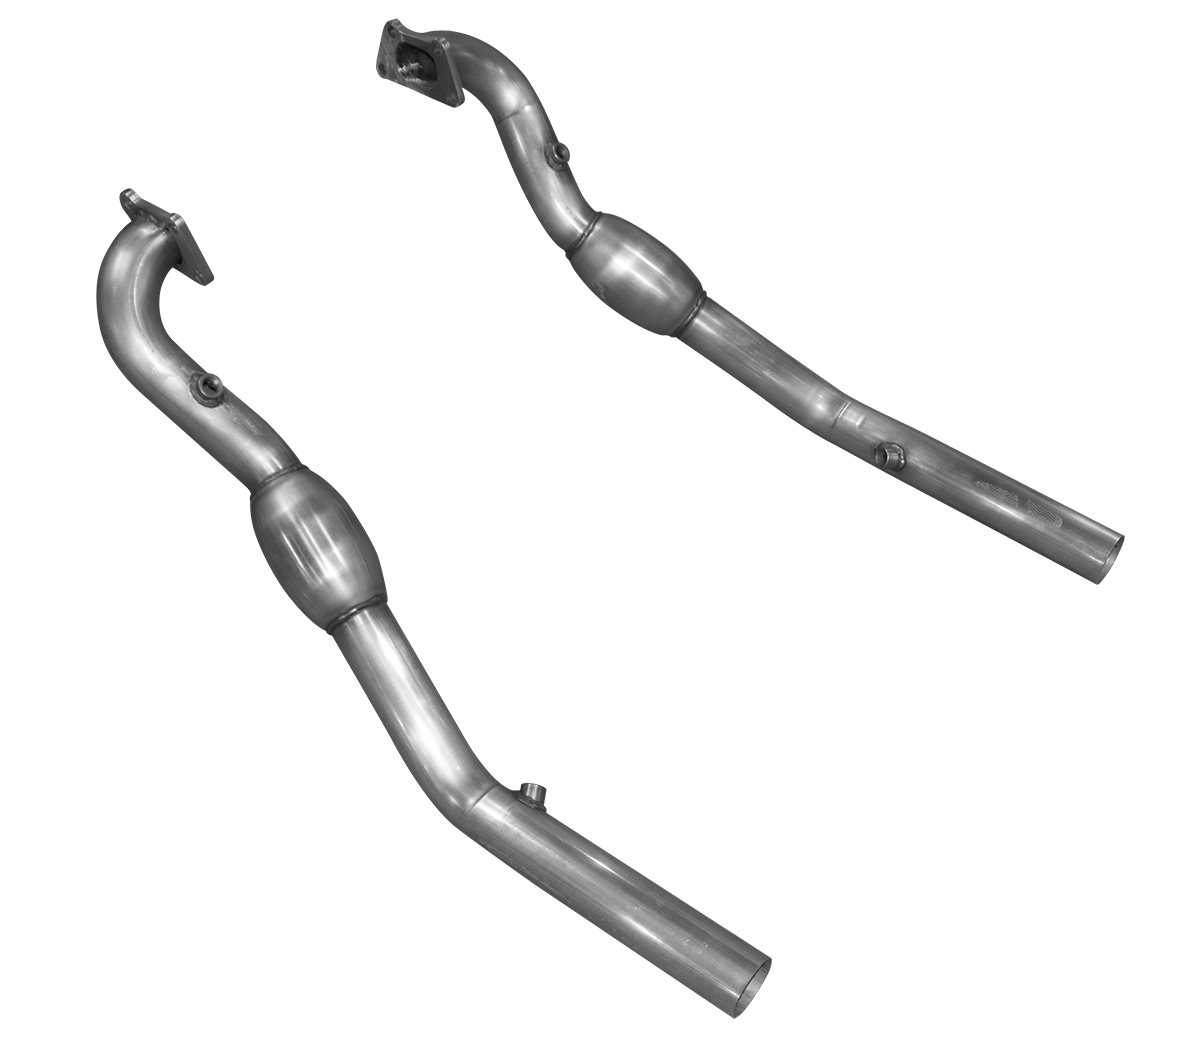 2012+ Camaro V6 American Racing Headers 2 1/2" Downpipes w/2 1/2" Catted Hpipe & Pure Thunder Catback